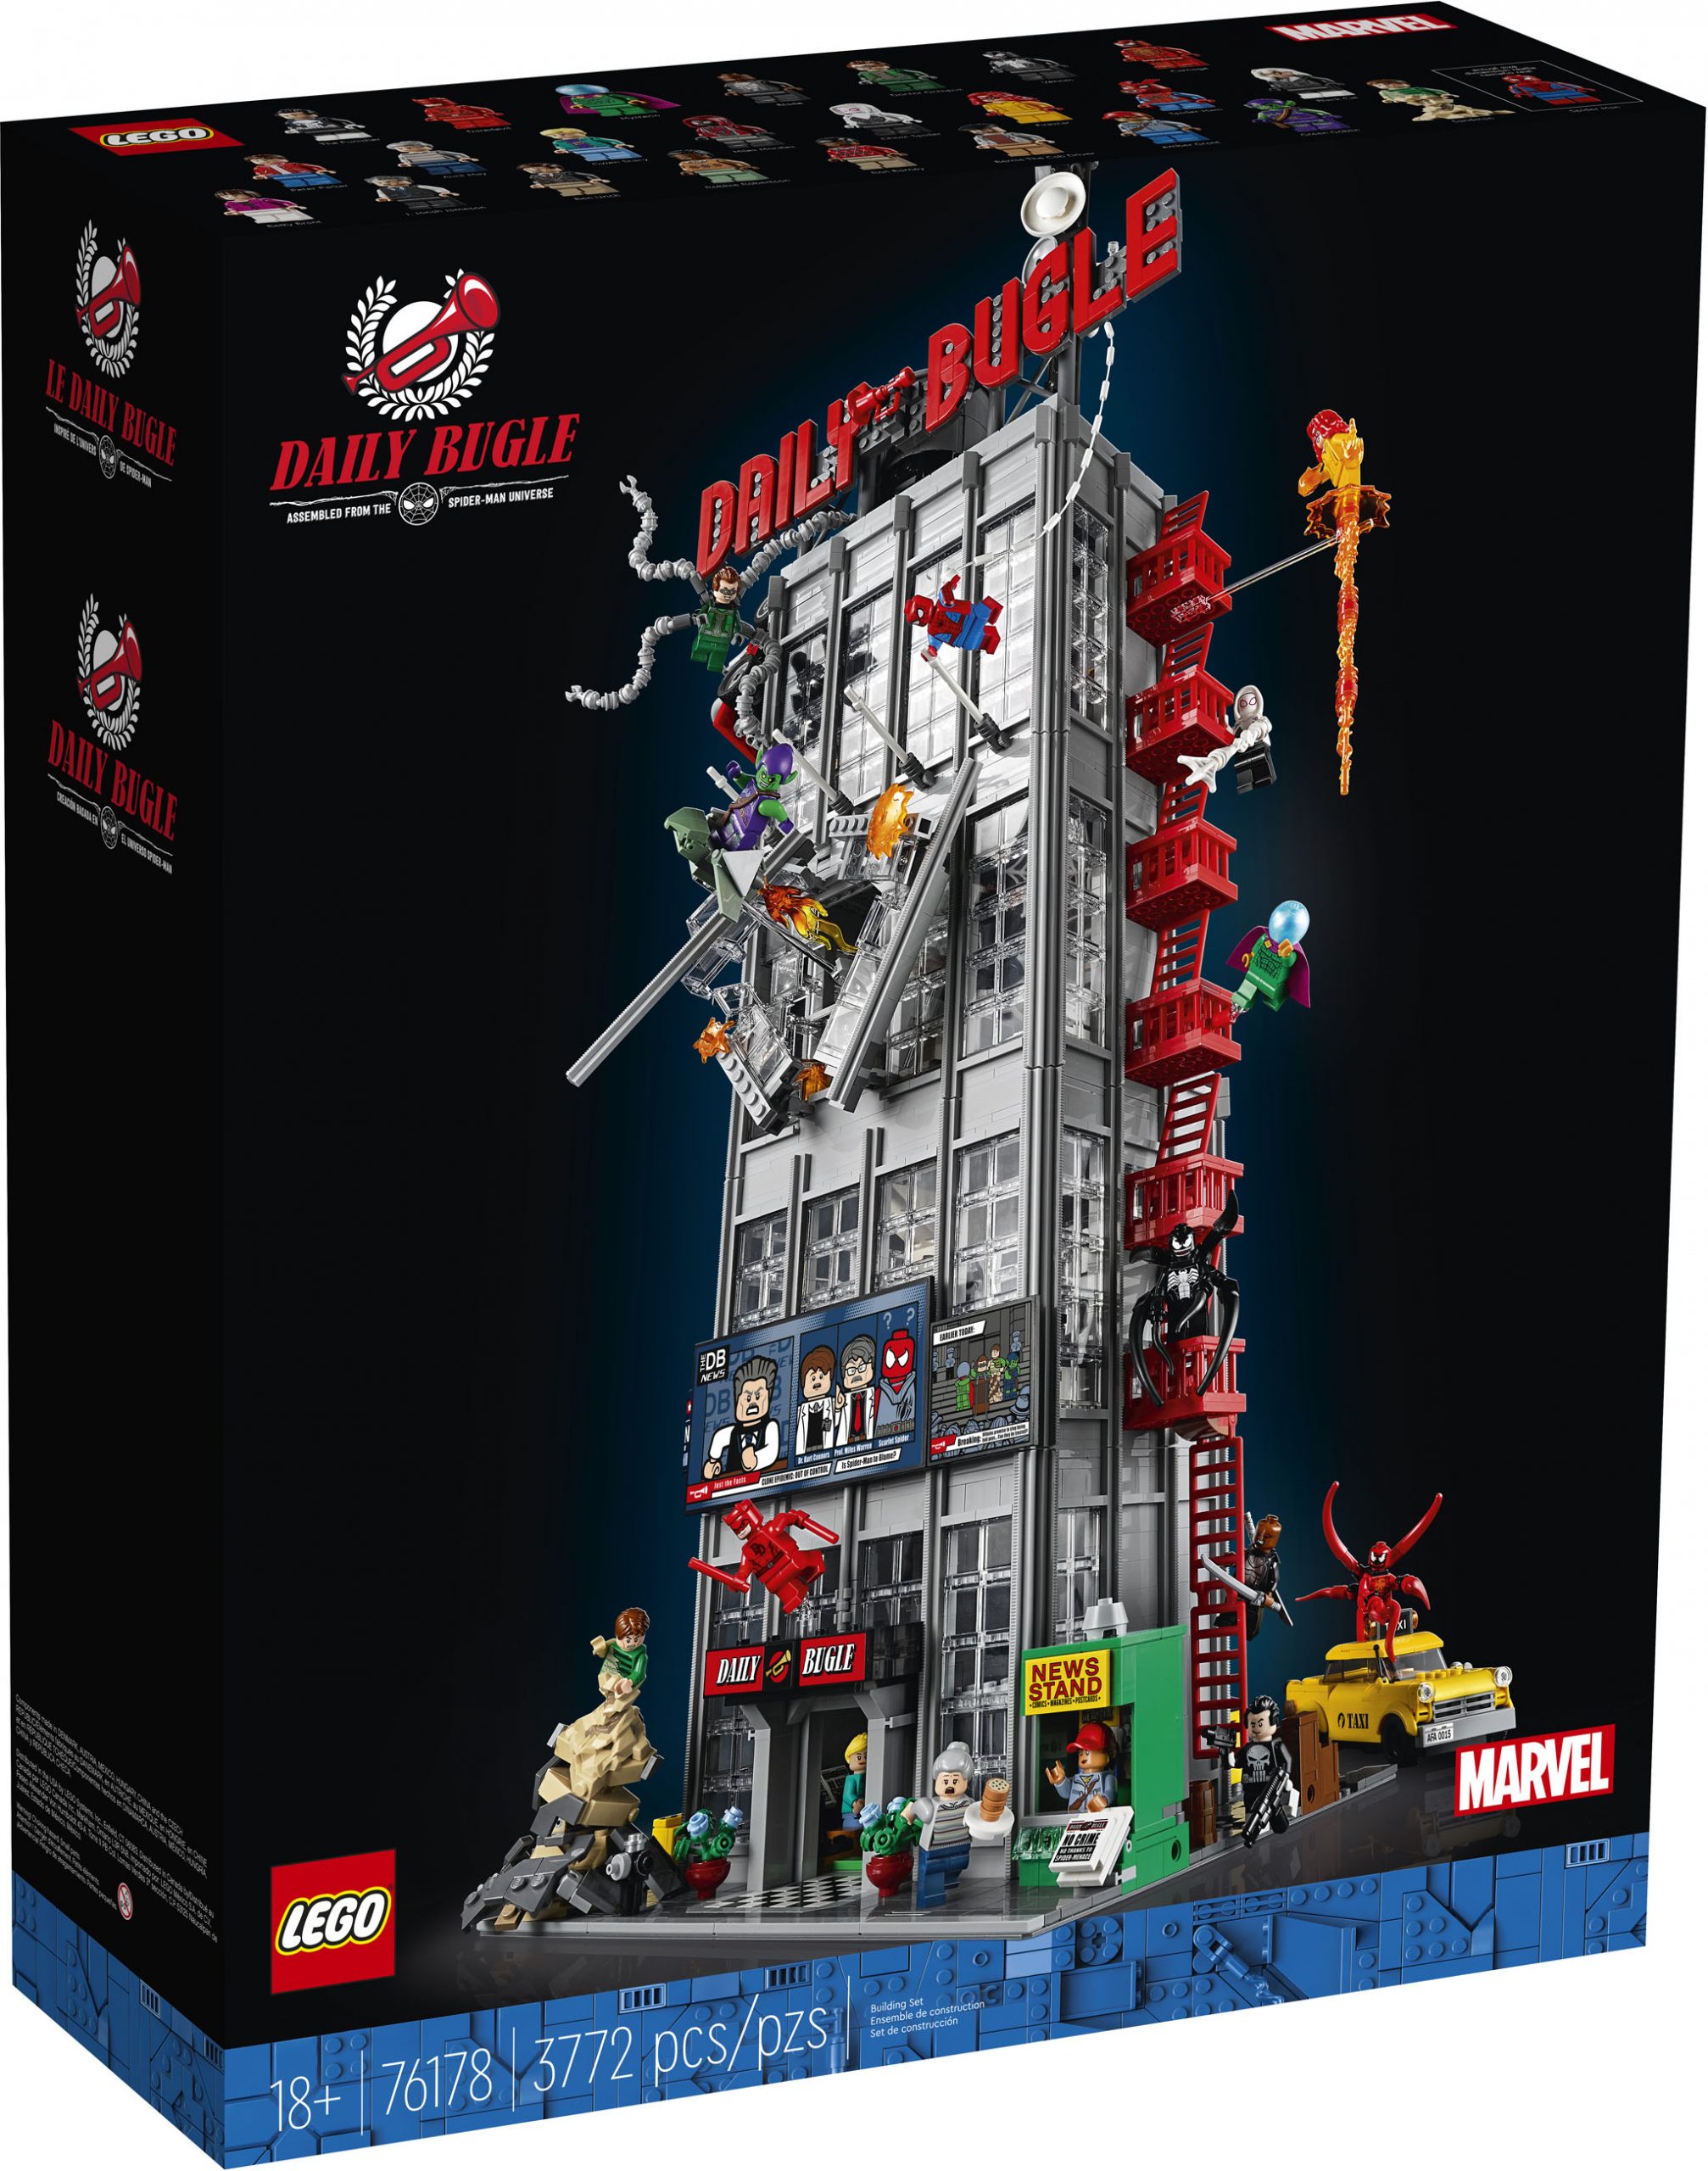 LEGO Marvel Super Heroes Daily Bugle (76178) Officially Announced - The  Brick Fan